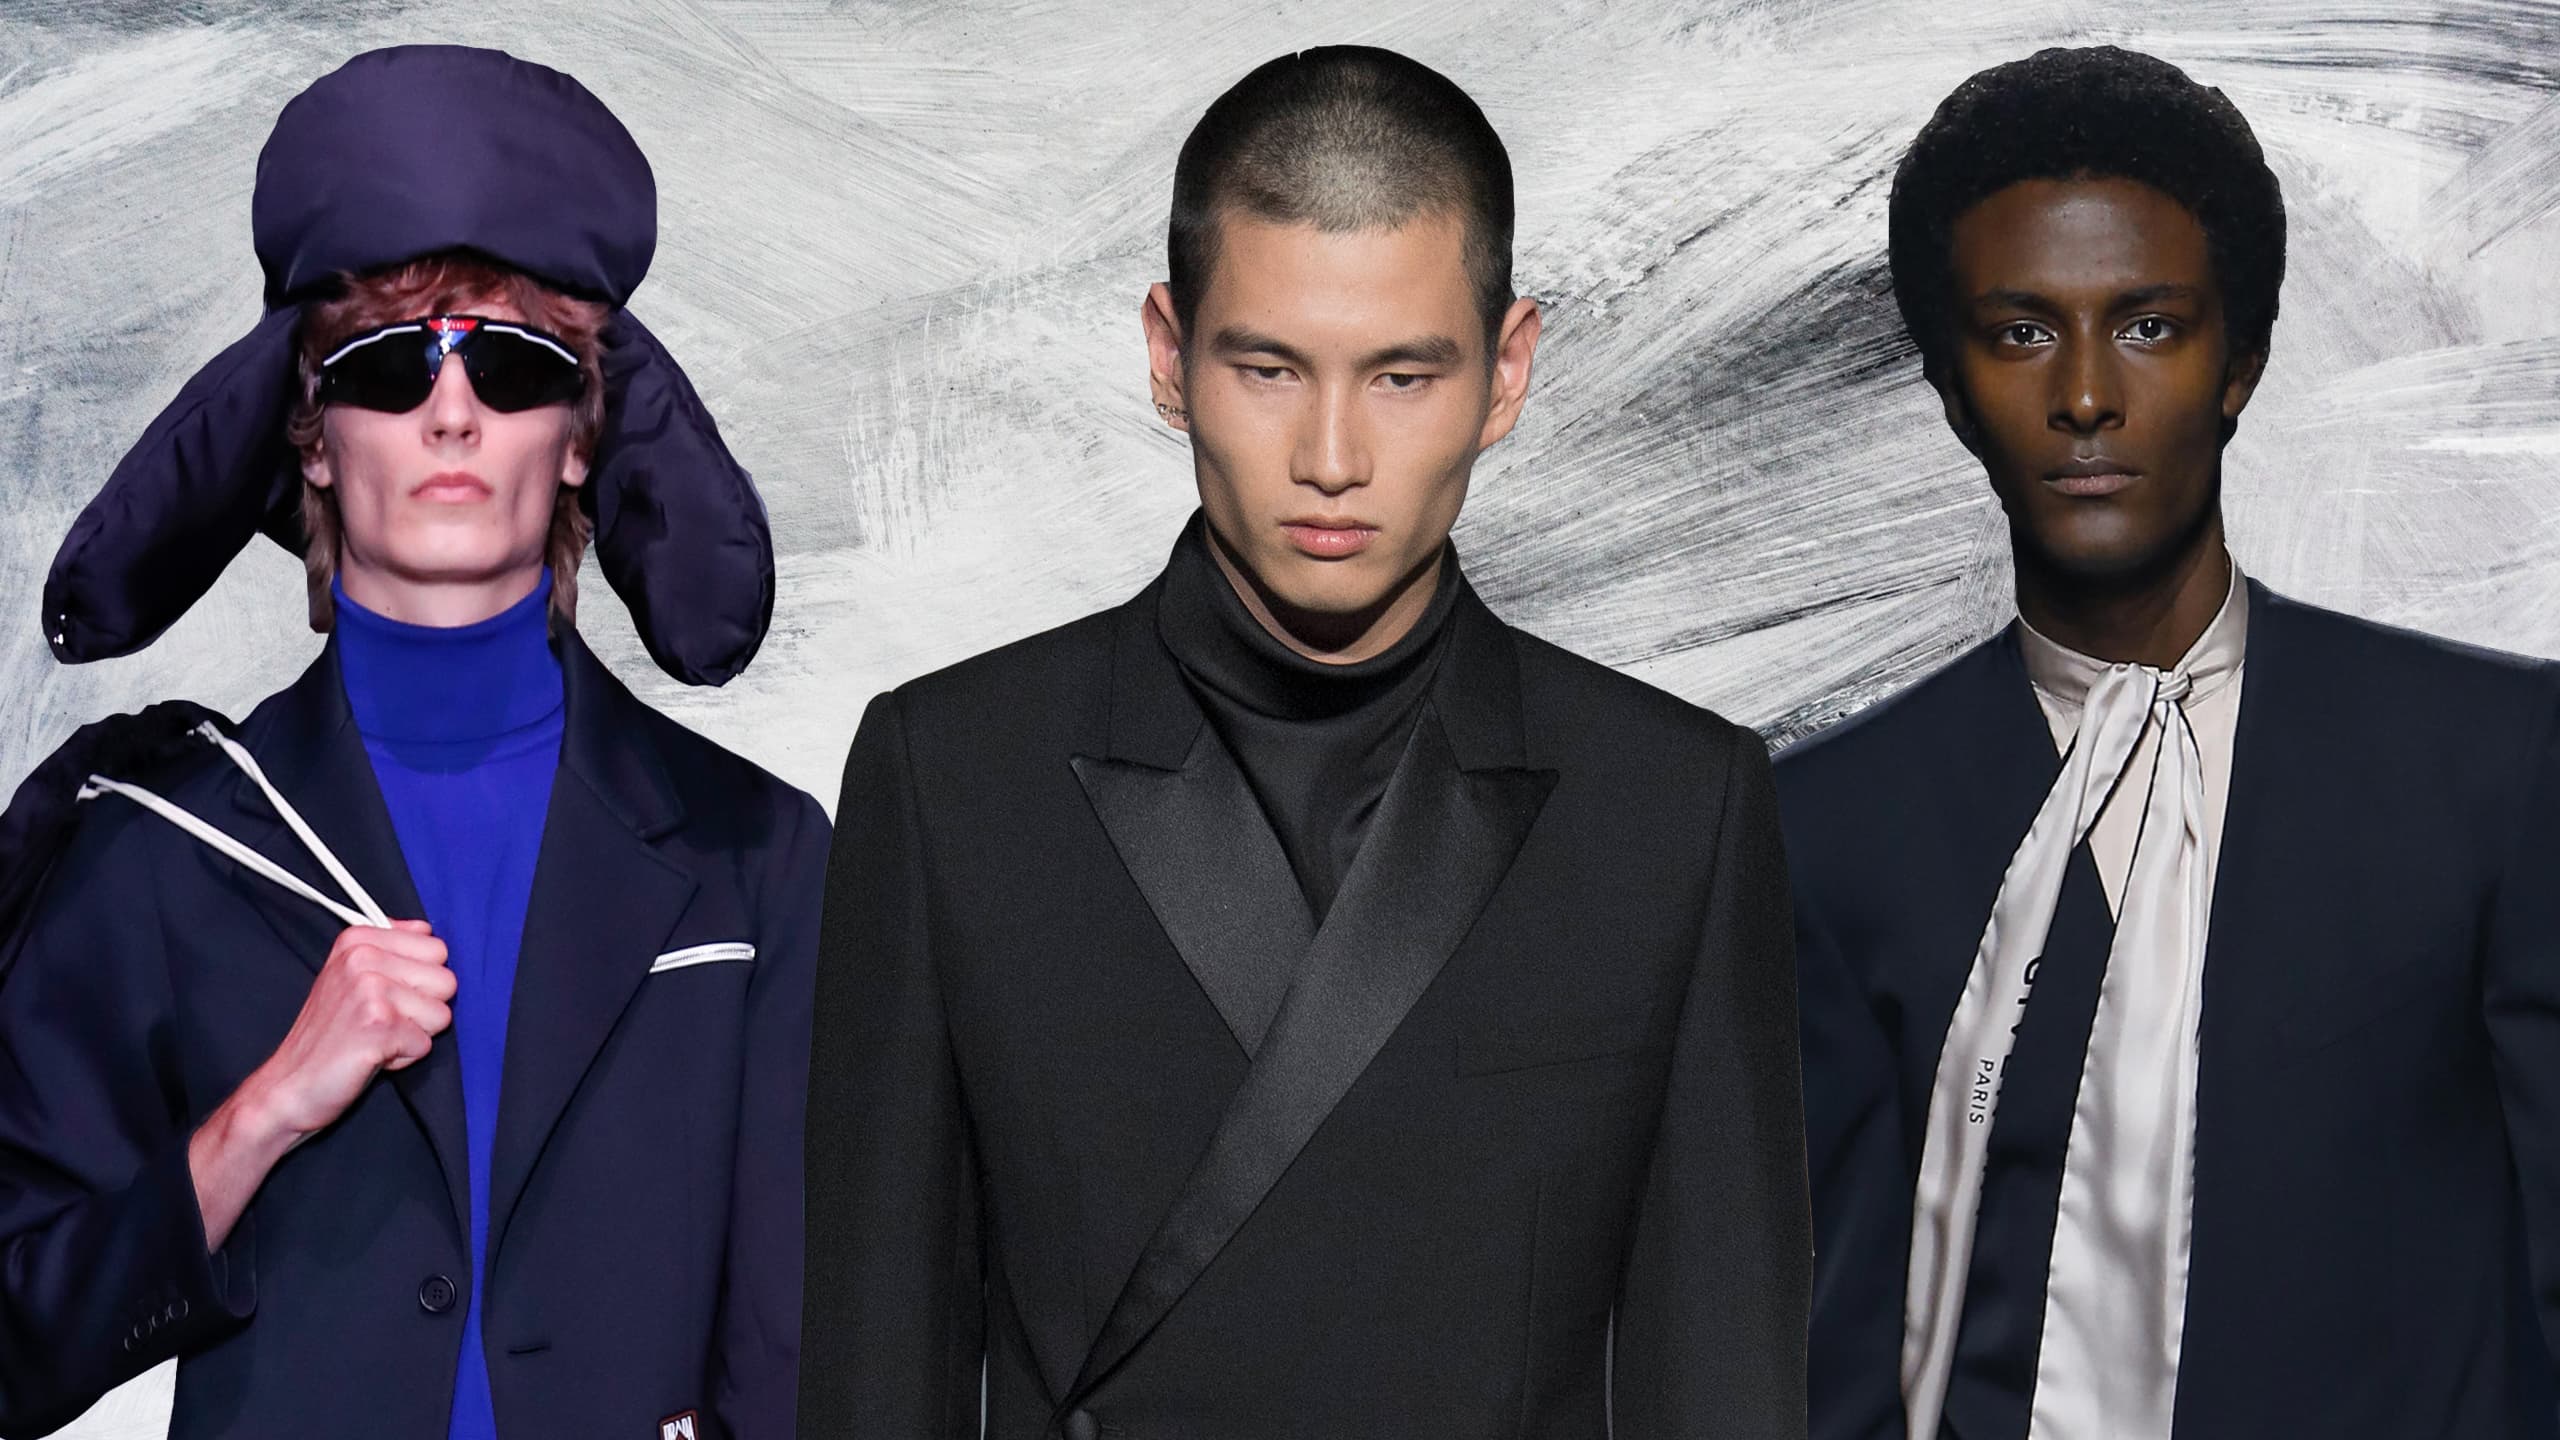 The guide to lapels: What are they and how to wear them